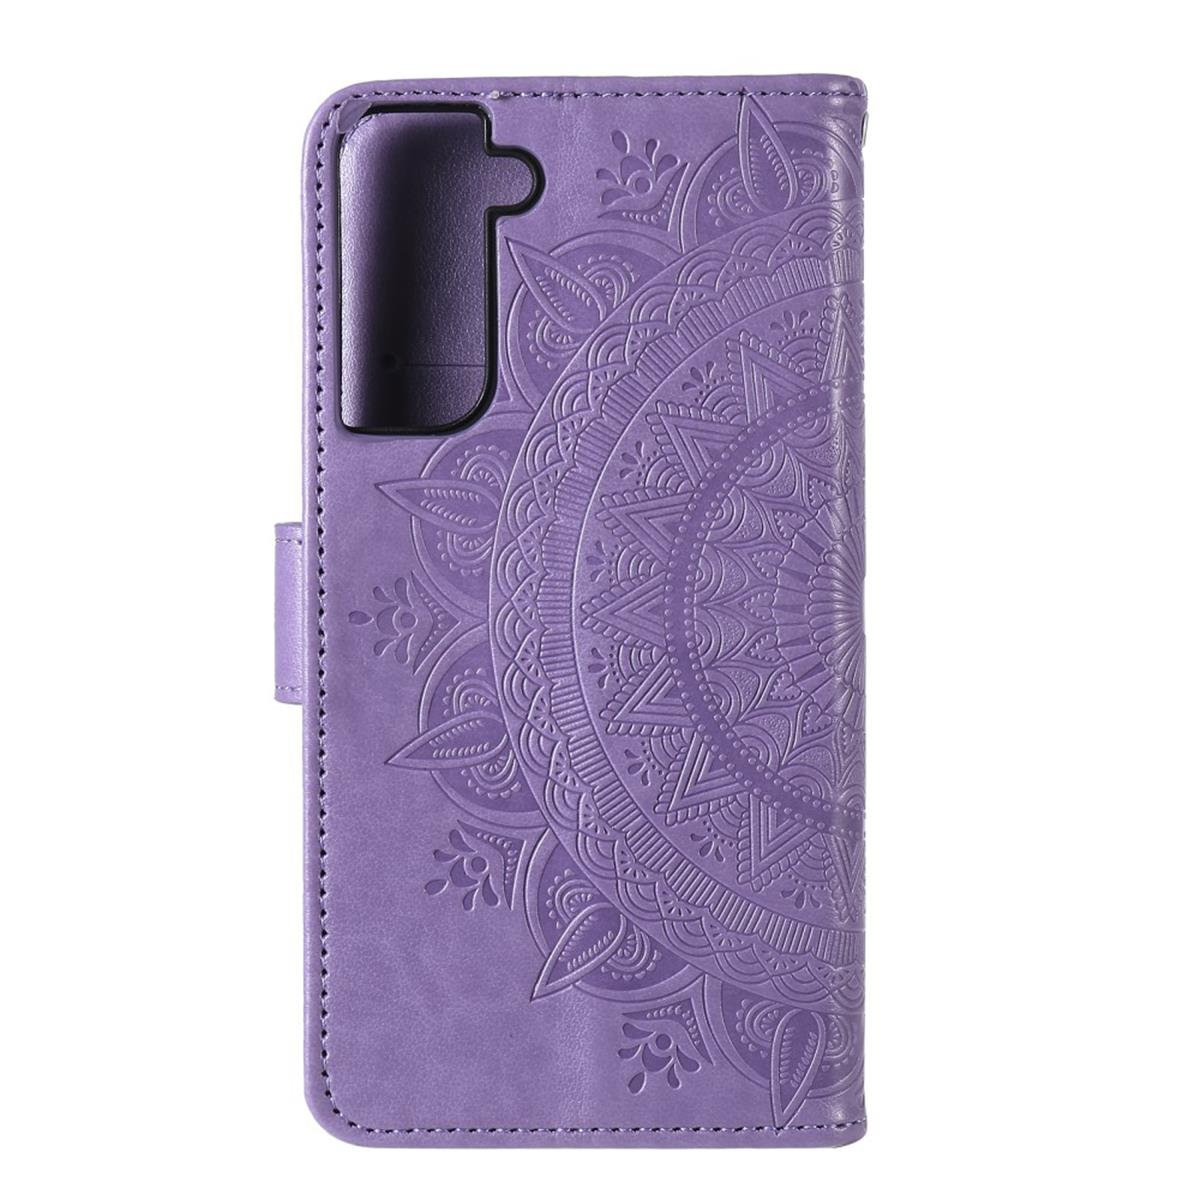 Samsung, S21, Bookcover, Lila COVERKINGZ Mandala Klapphülle Muster, Galaxy mit